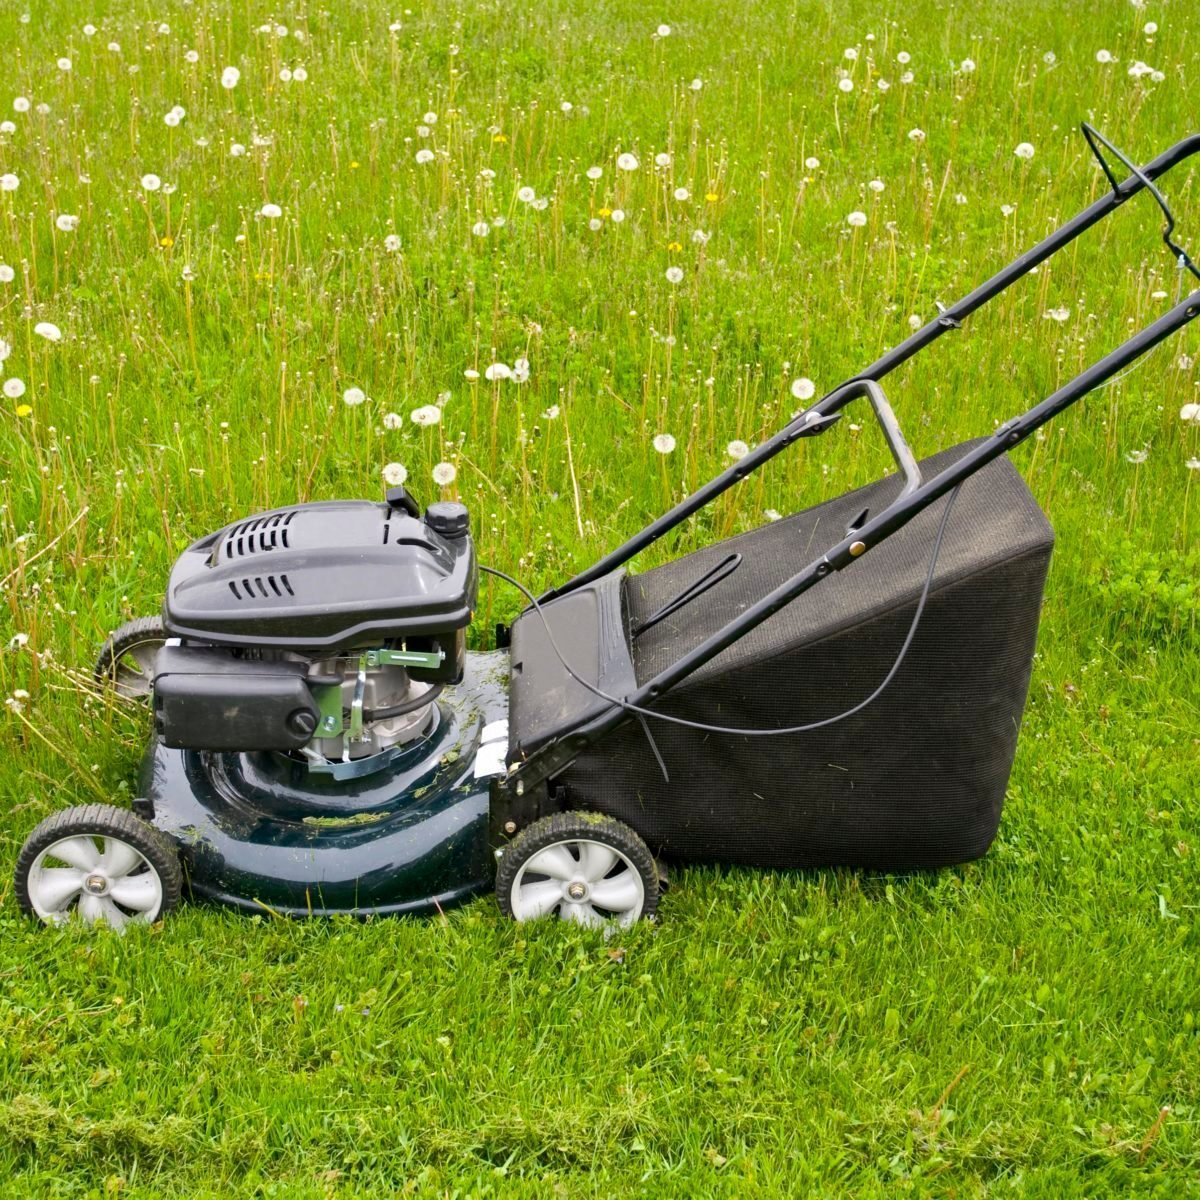 When Should I Stop Mowing My Lawn in the Fall?